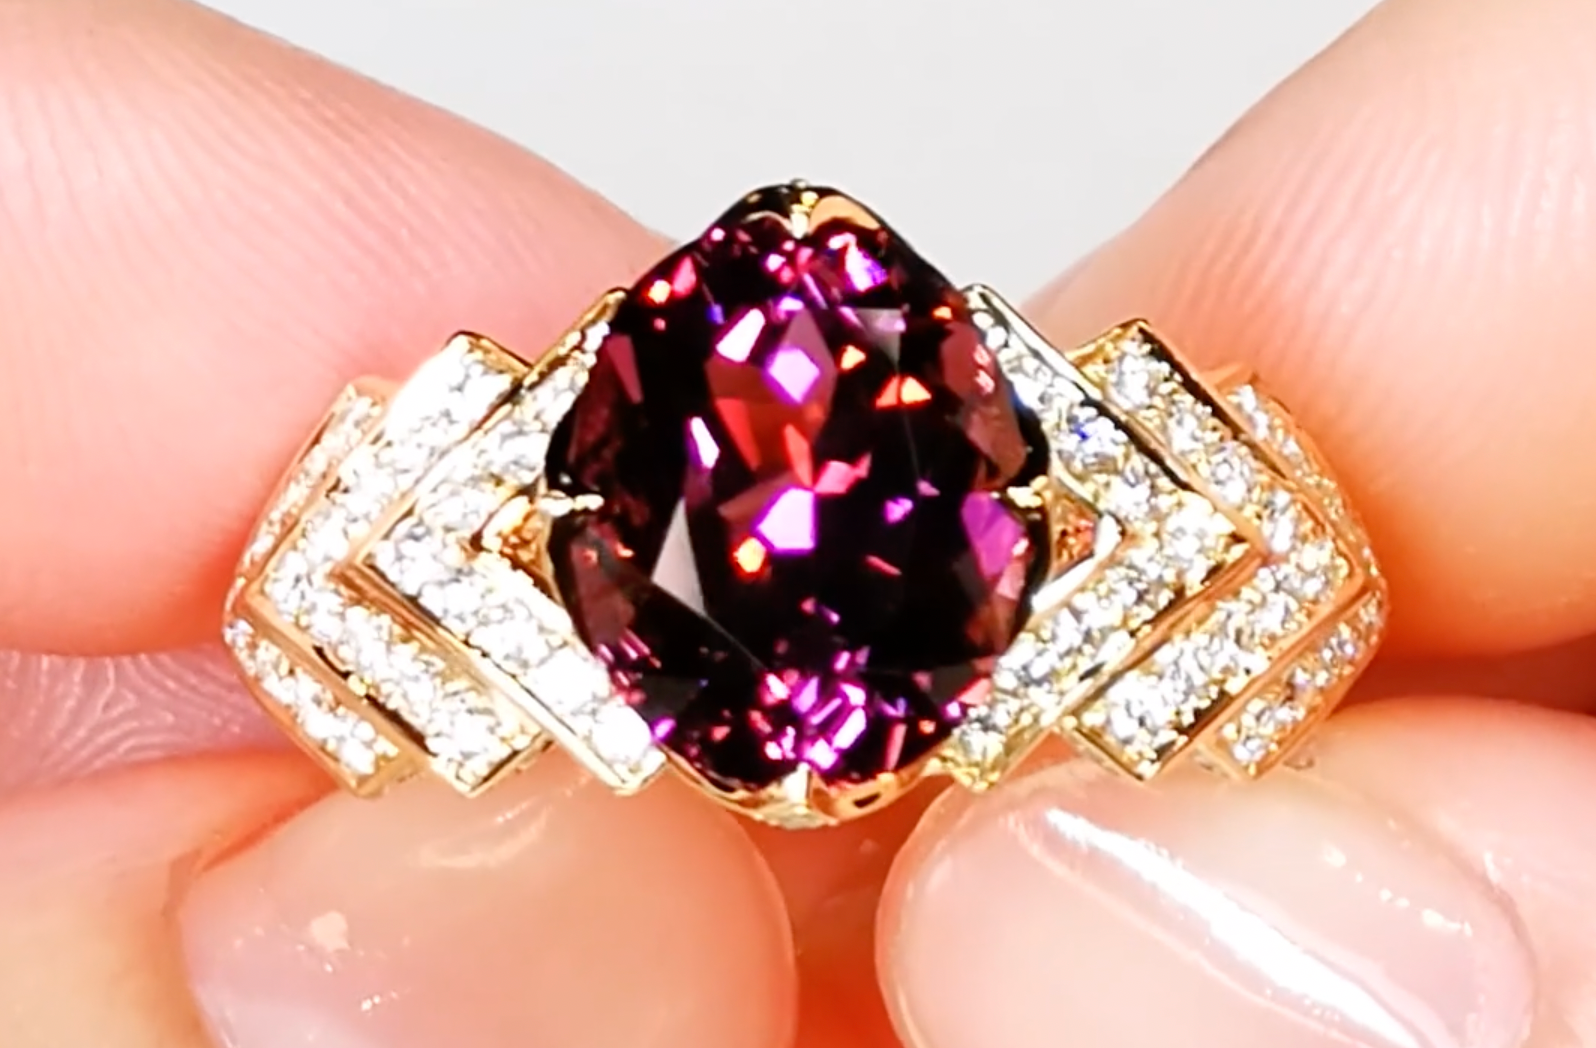 3.60ct Rubellite Tourmaline Ring with D Flawless Diamonds set in 18K Yellow Gold